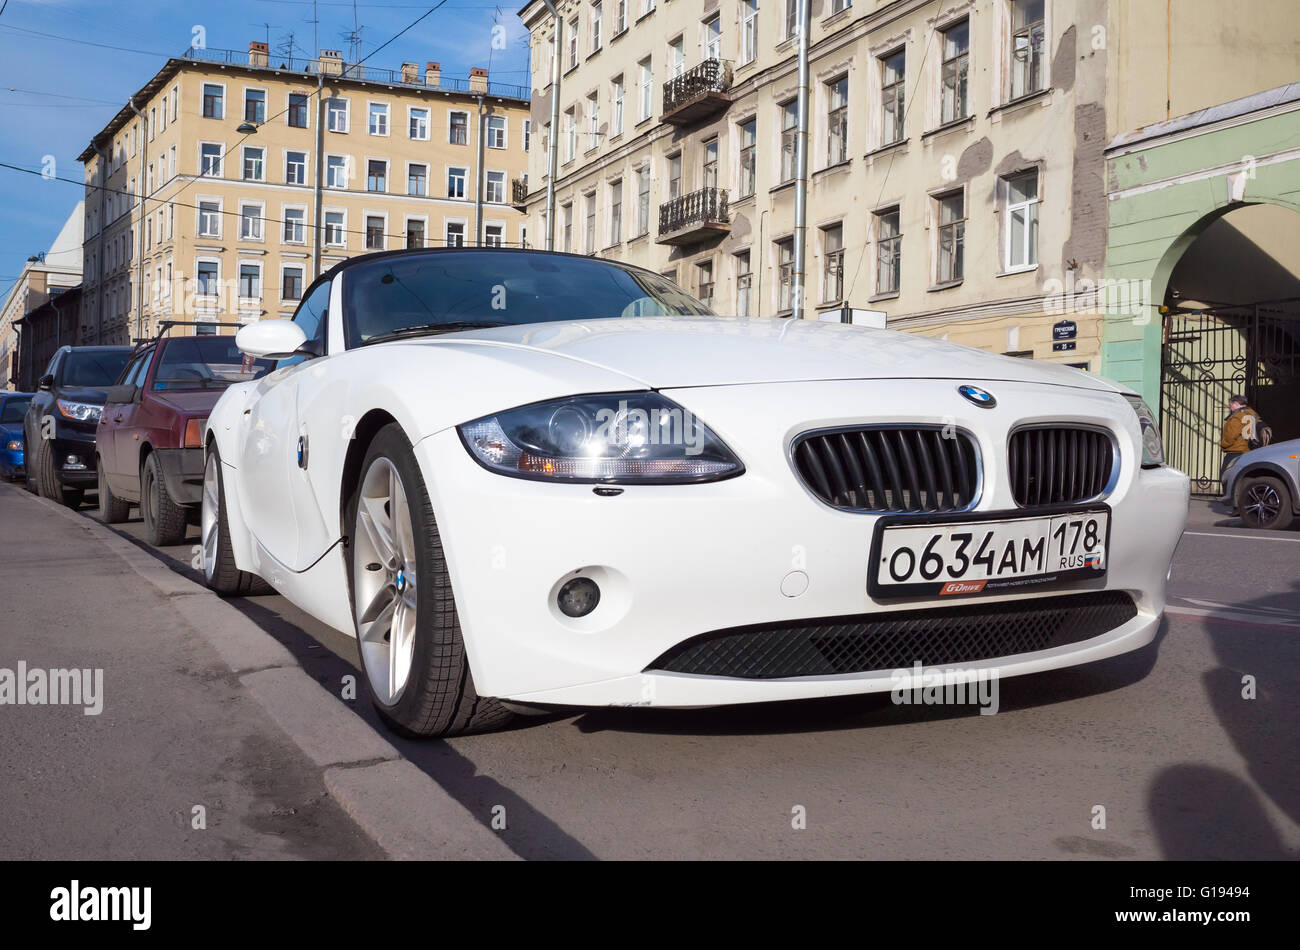 Saint-Petersburg, Russia - April 13, 2016: White BMW Z4 E85 car designed by Danish designer Anders Warming. The roadster is park Stock Photo